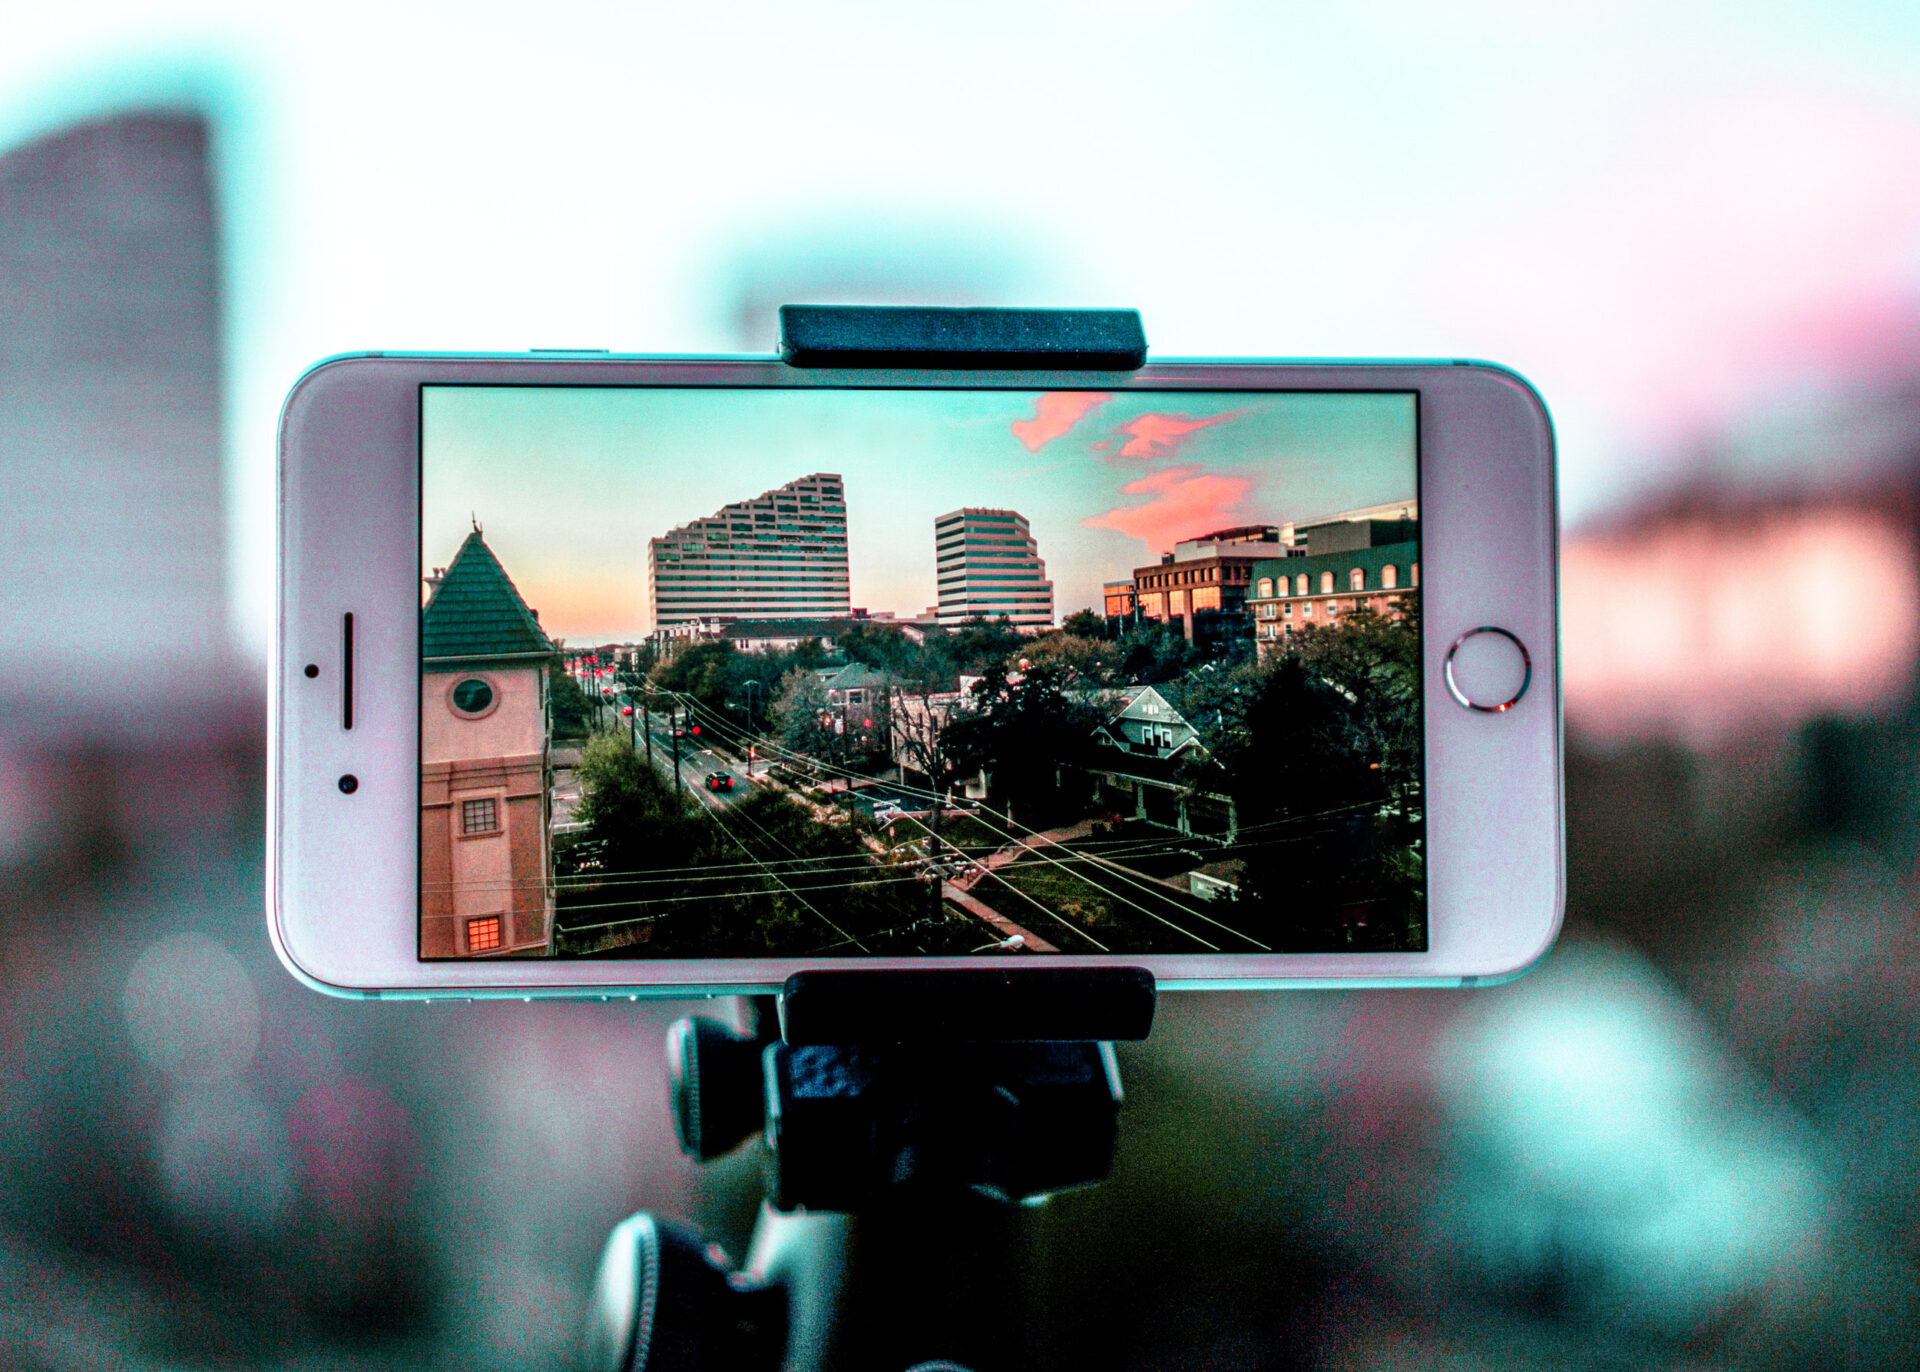 How to Make Your Phone Videos Look More Professional